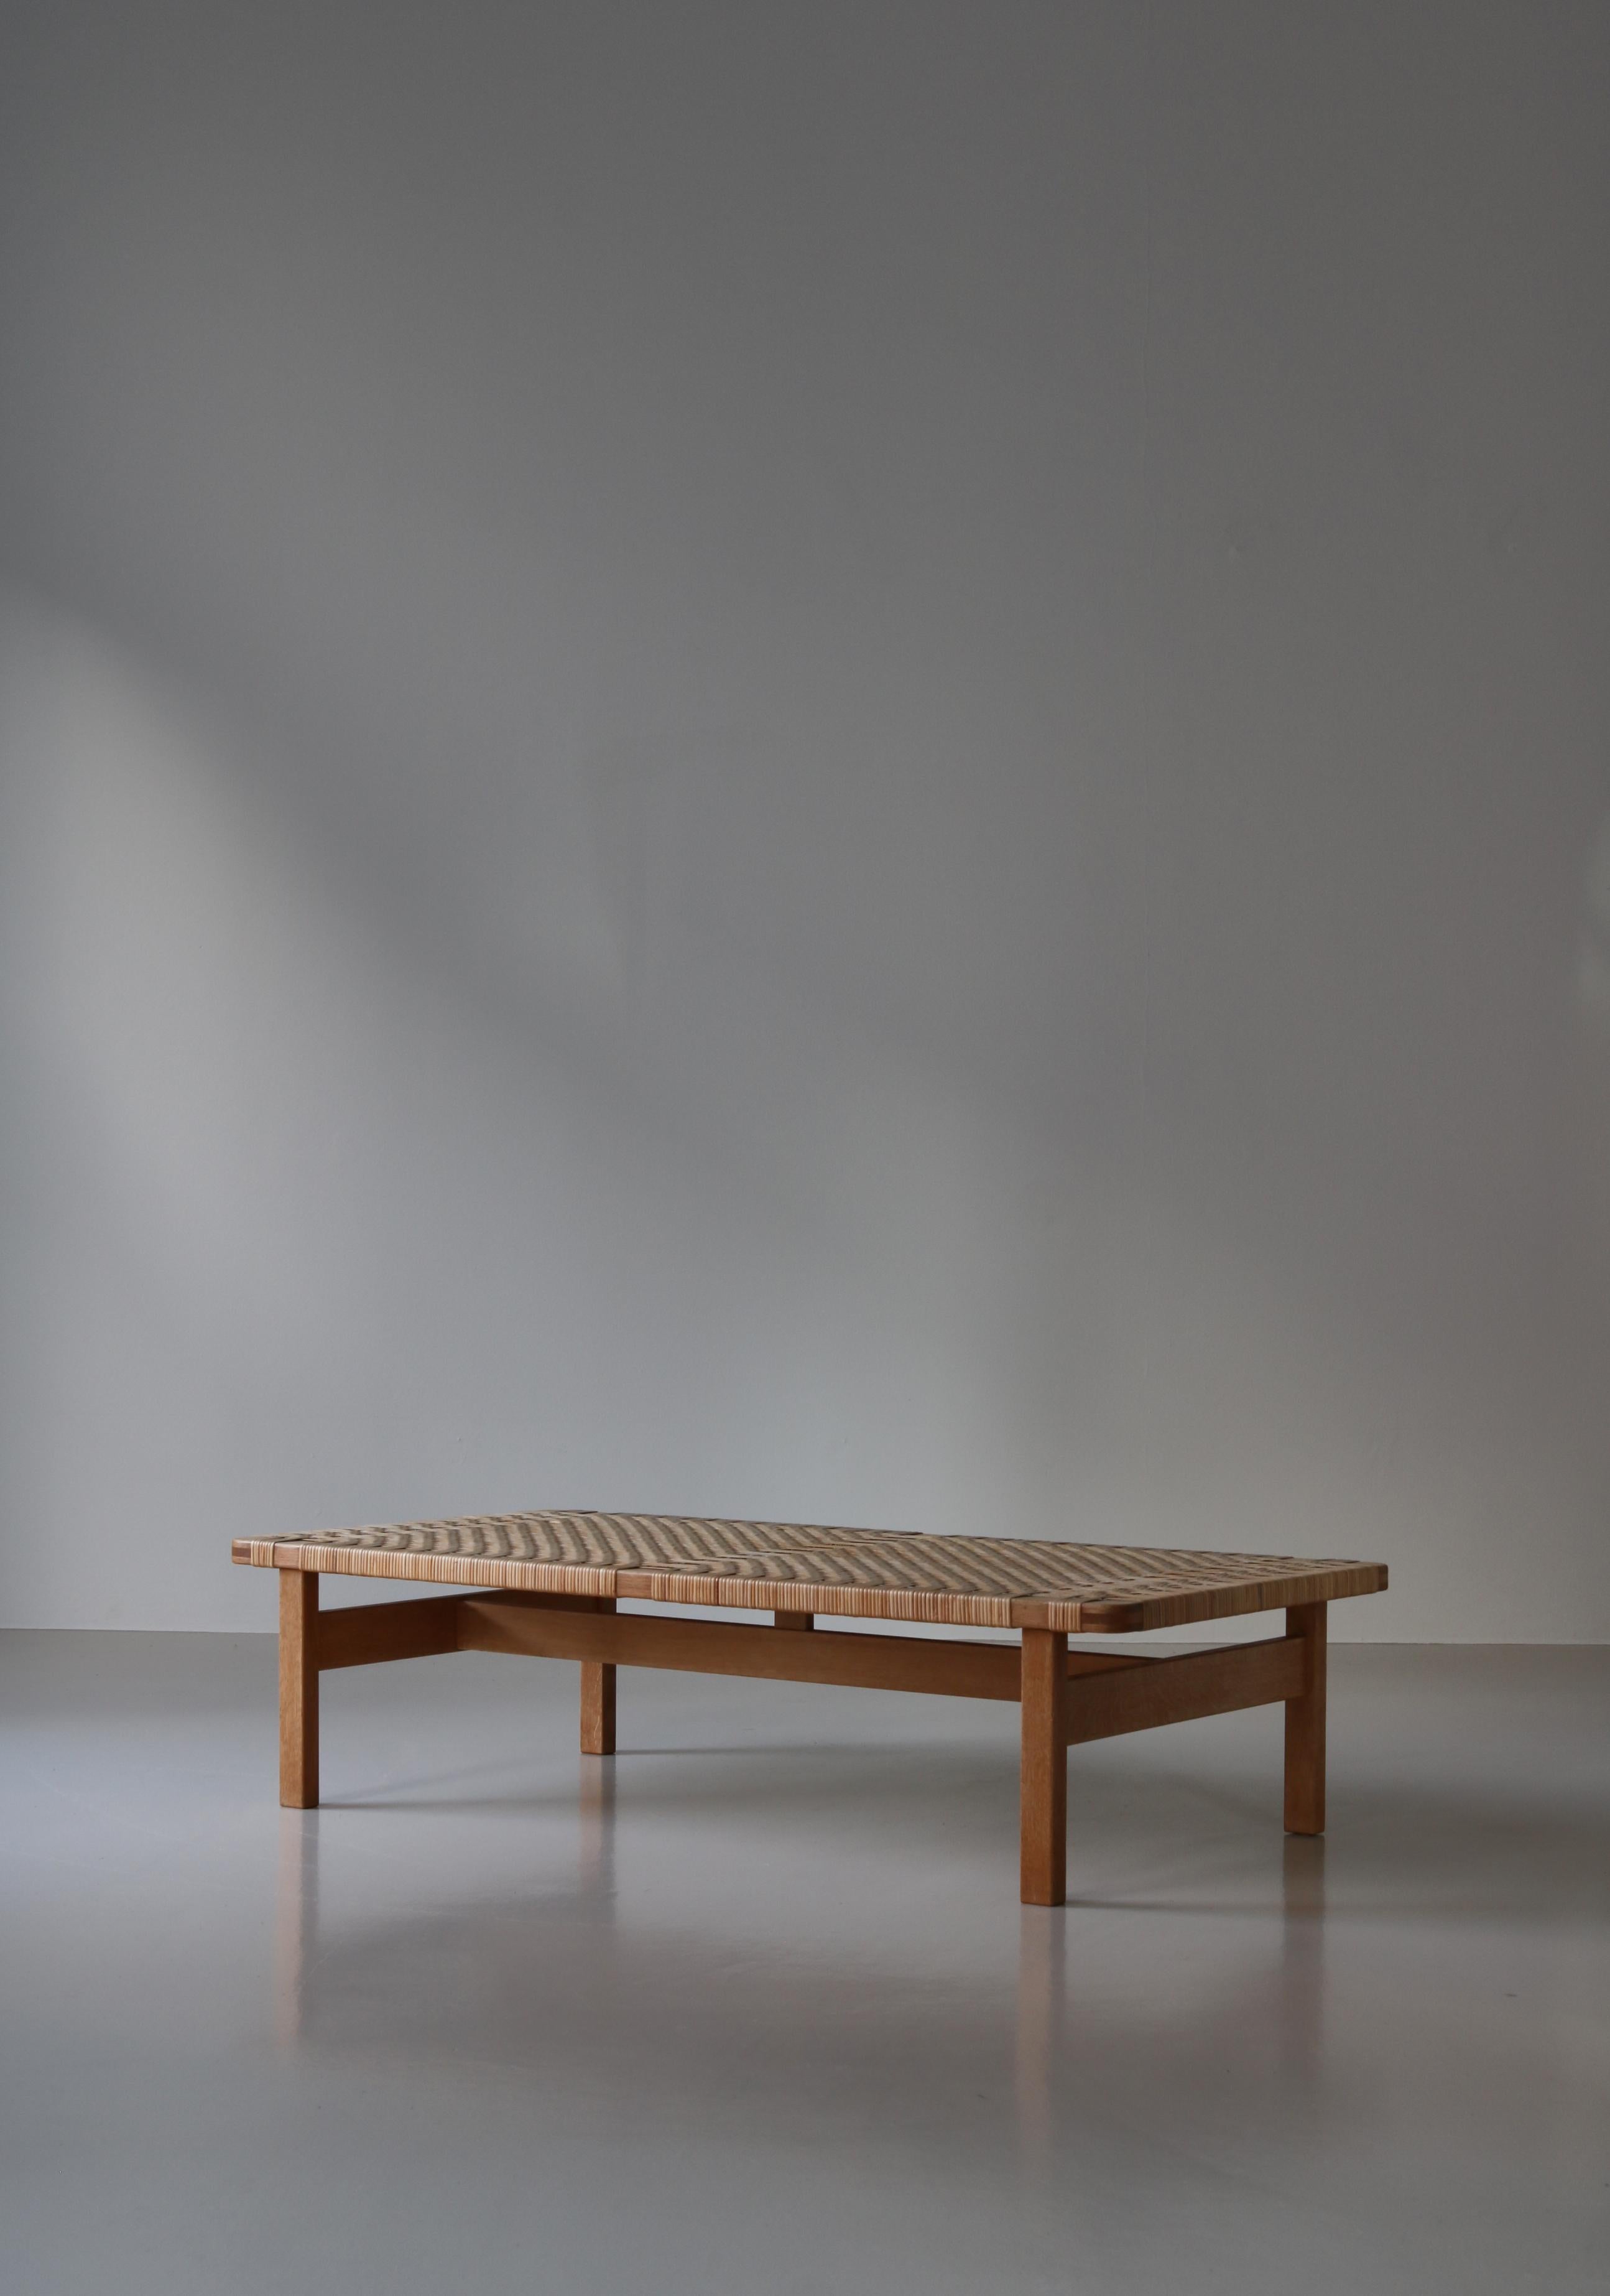 Borge Mogensen Large Side Table or Bench in Oak and Rattan Cane, 1960s, Denmark For Sale 7